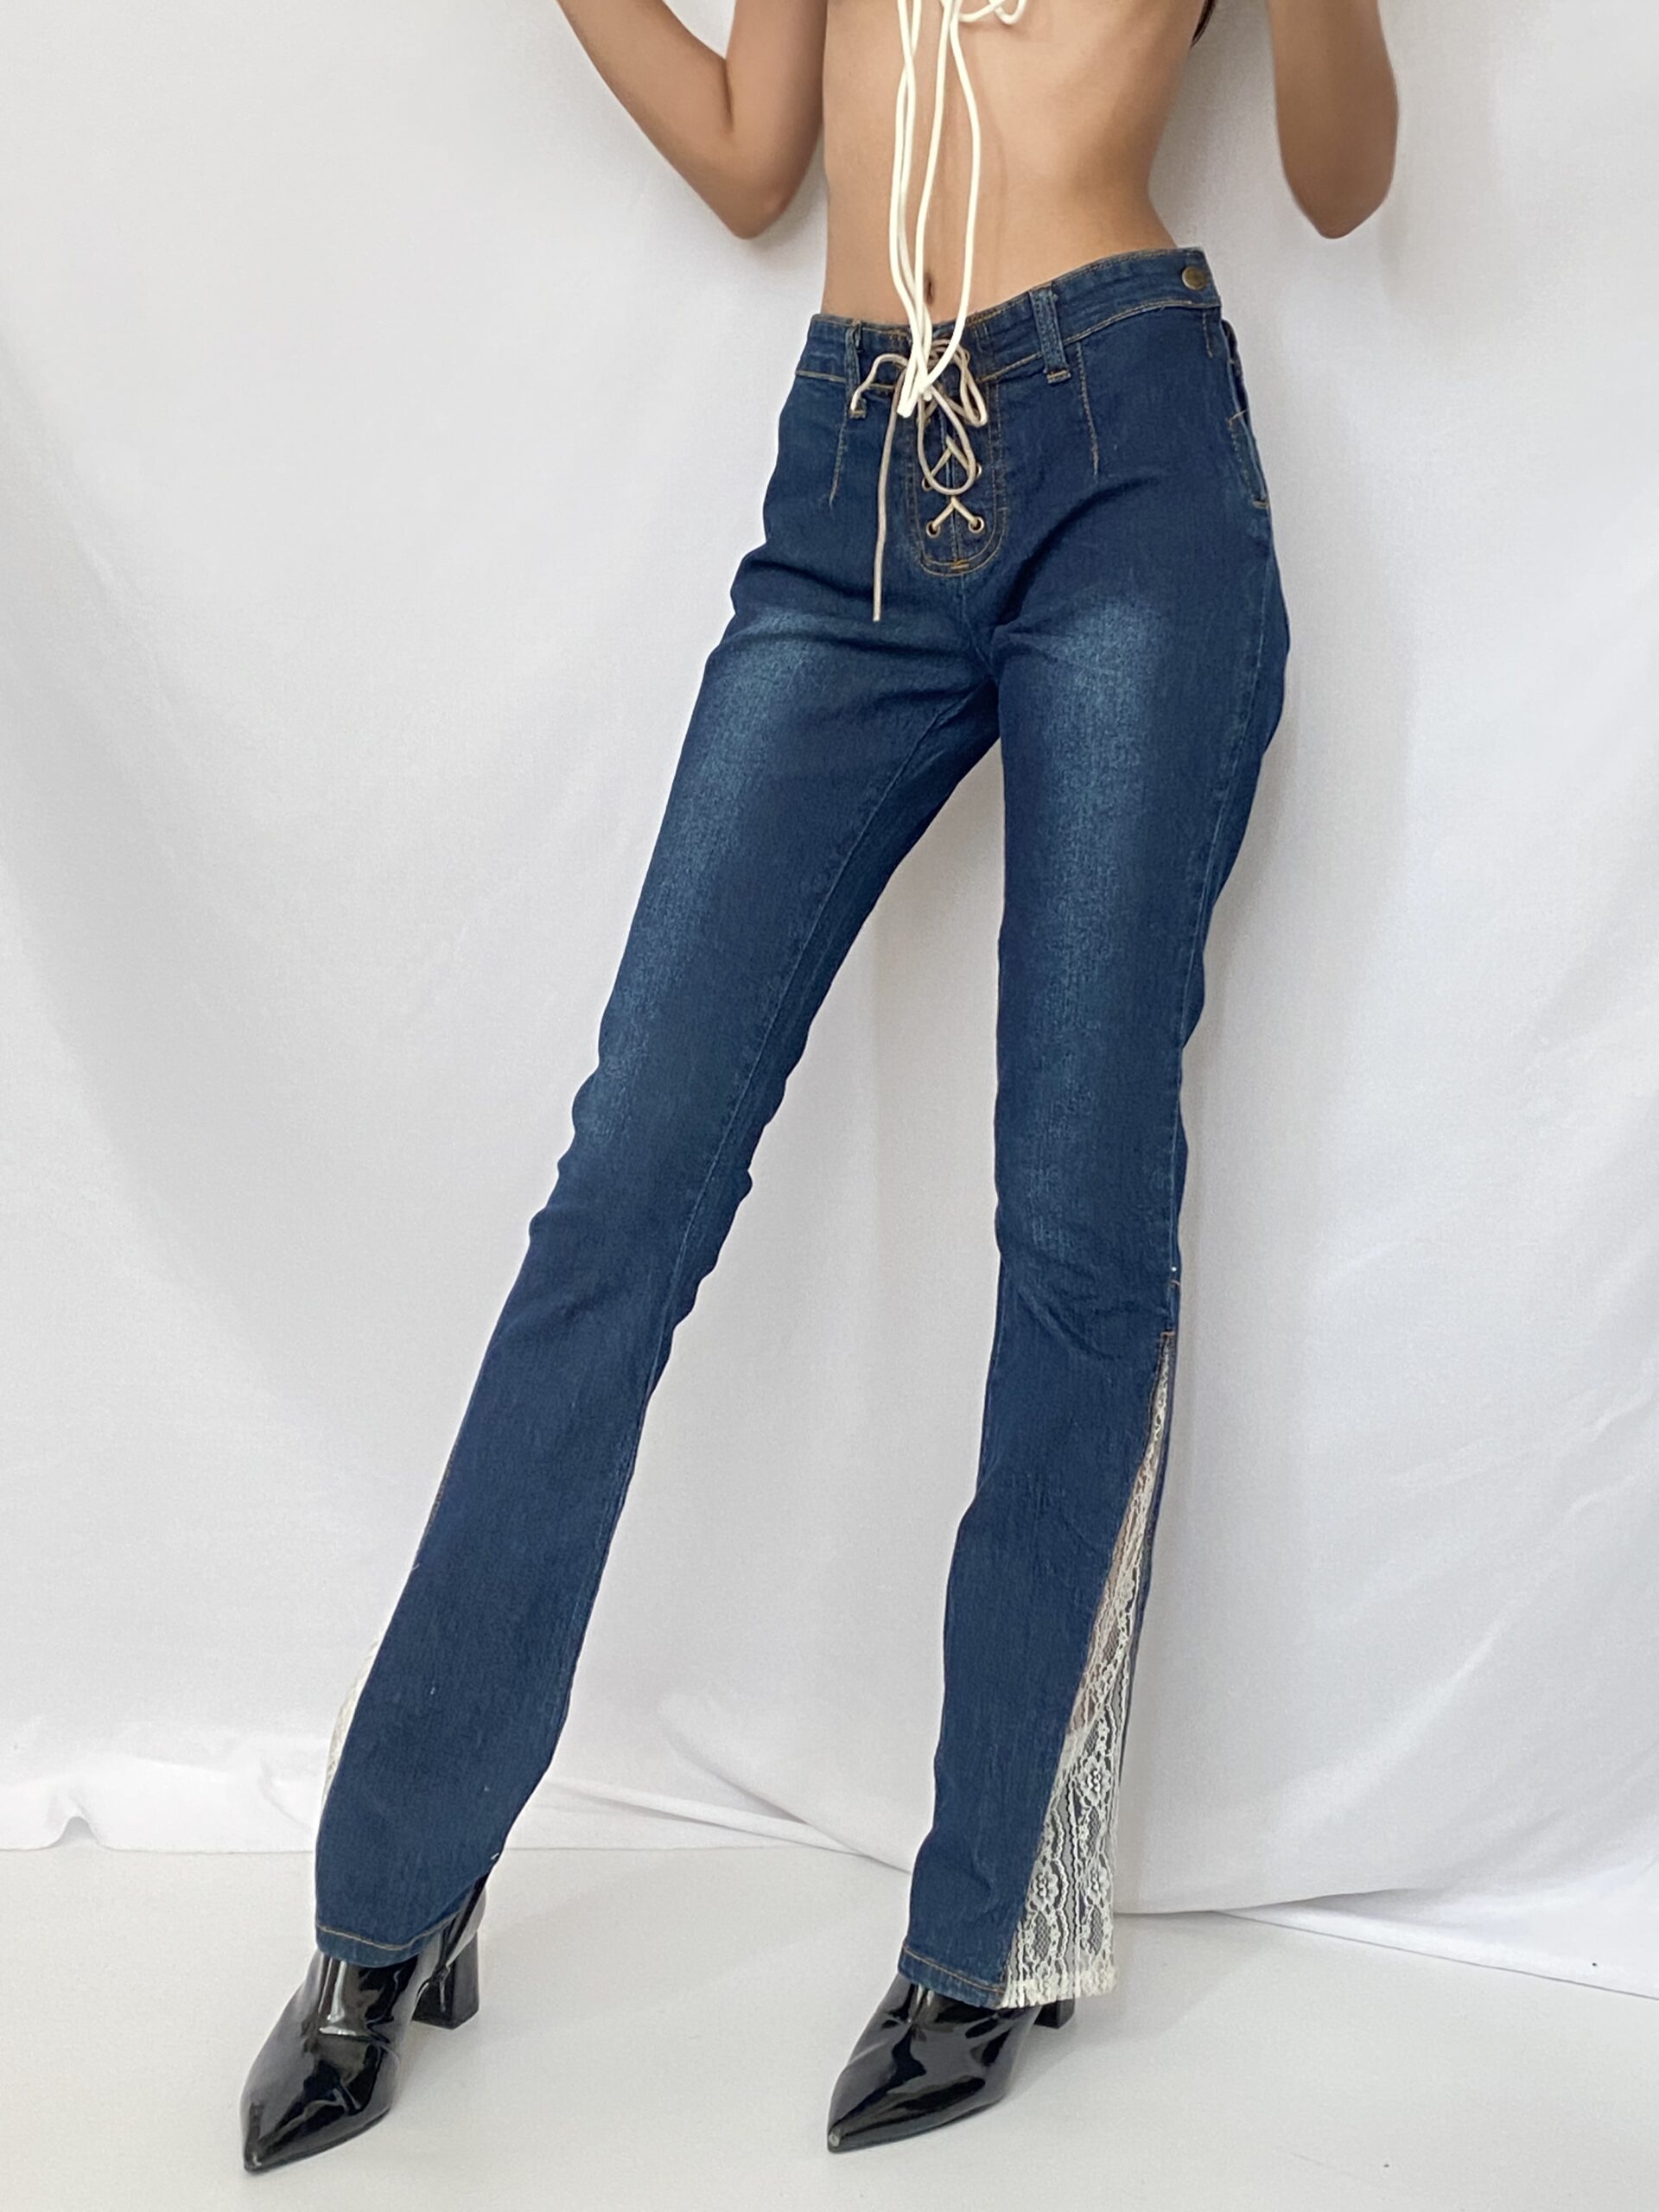 Early 2000s Dark Washed Flare Lacey Jeans - Styledcxo